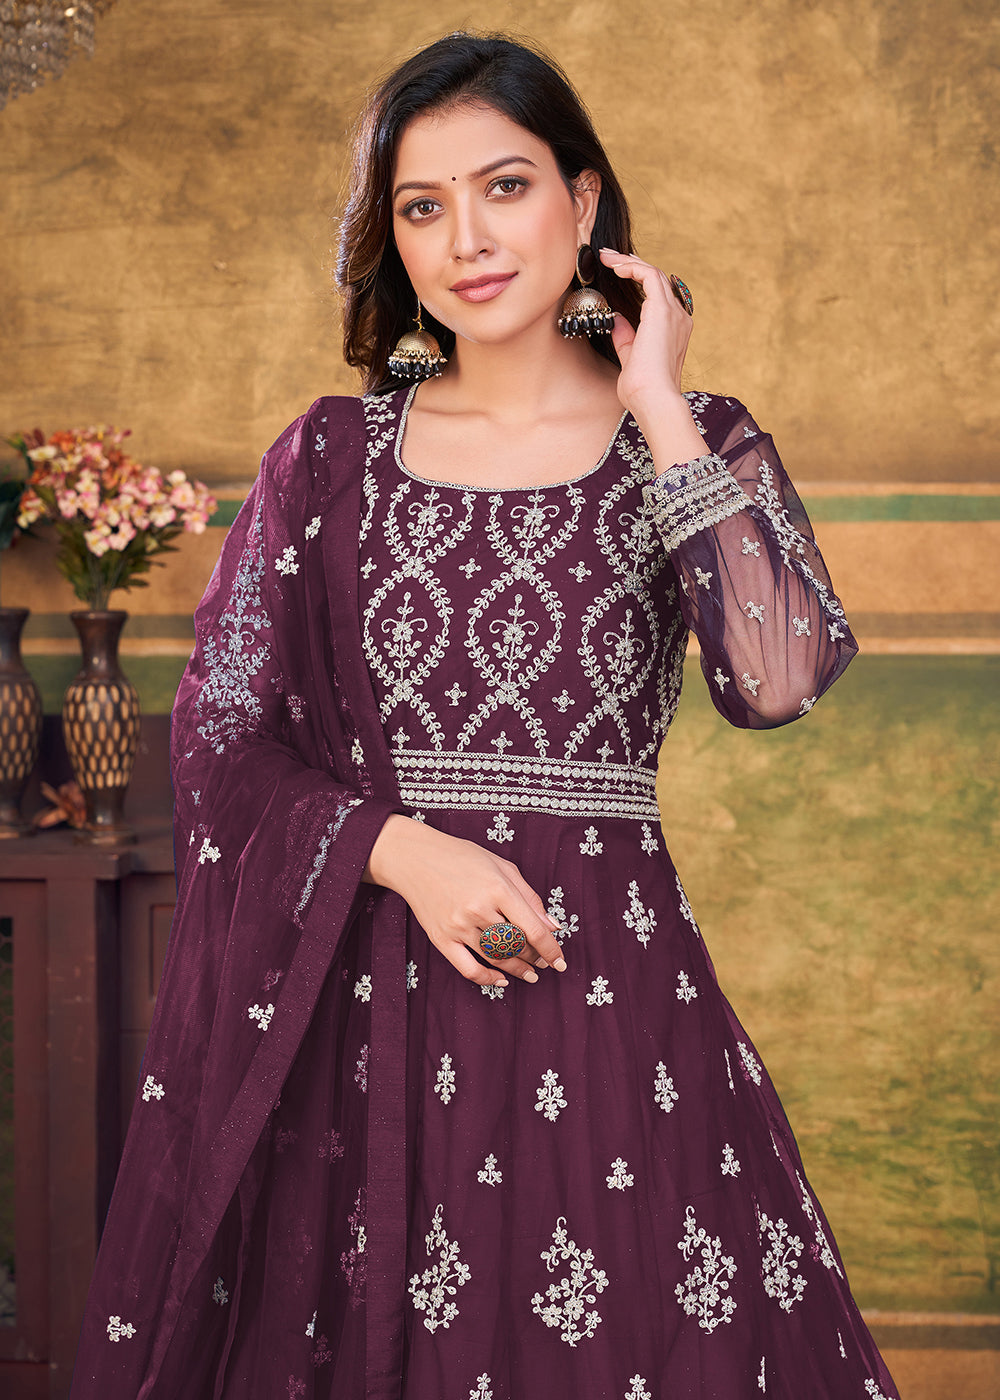 Buy Now Function Look Classic Wine Plum Net Anarkali Suit Online in USA, UK, Australia, New Zealand, Canada, Italy & Worldwide at Empress Clothing.